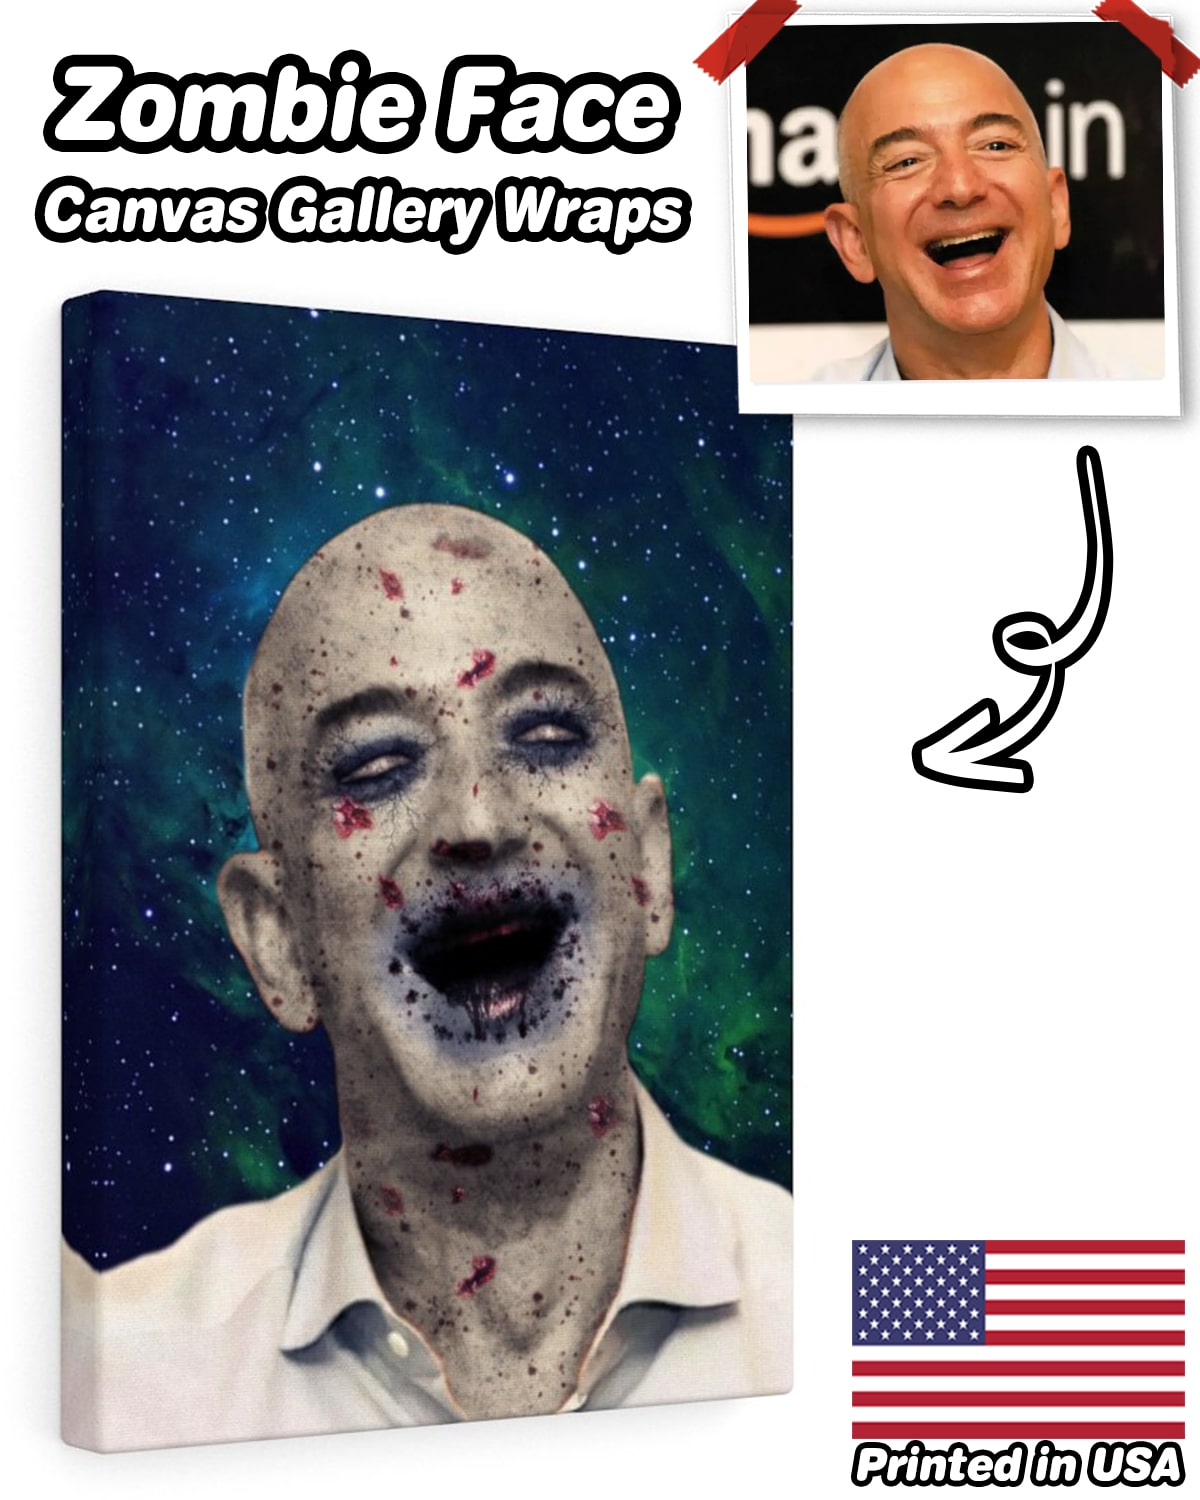 Personalized Canvas Gallery Wraps - Zombie Face - ASDF Print